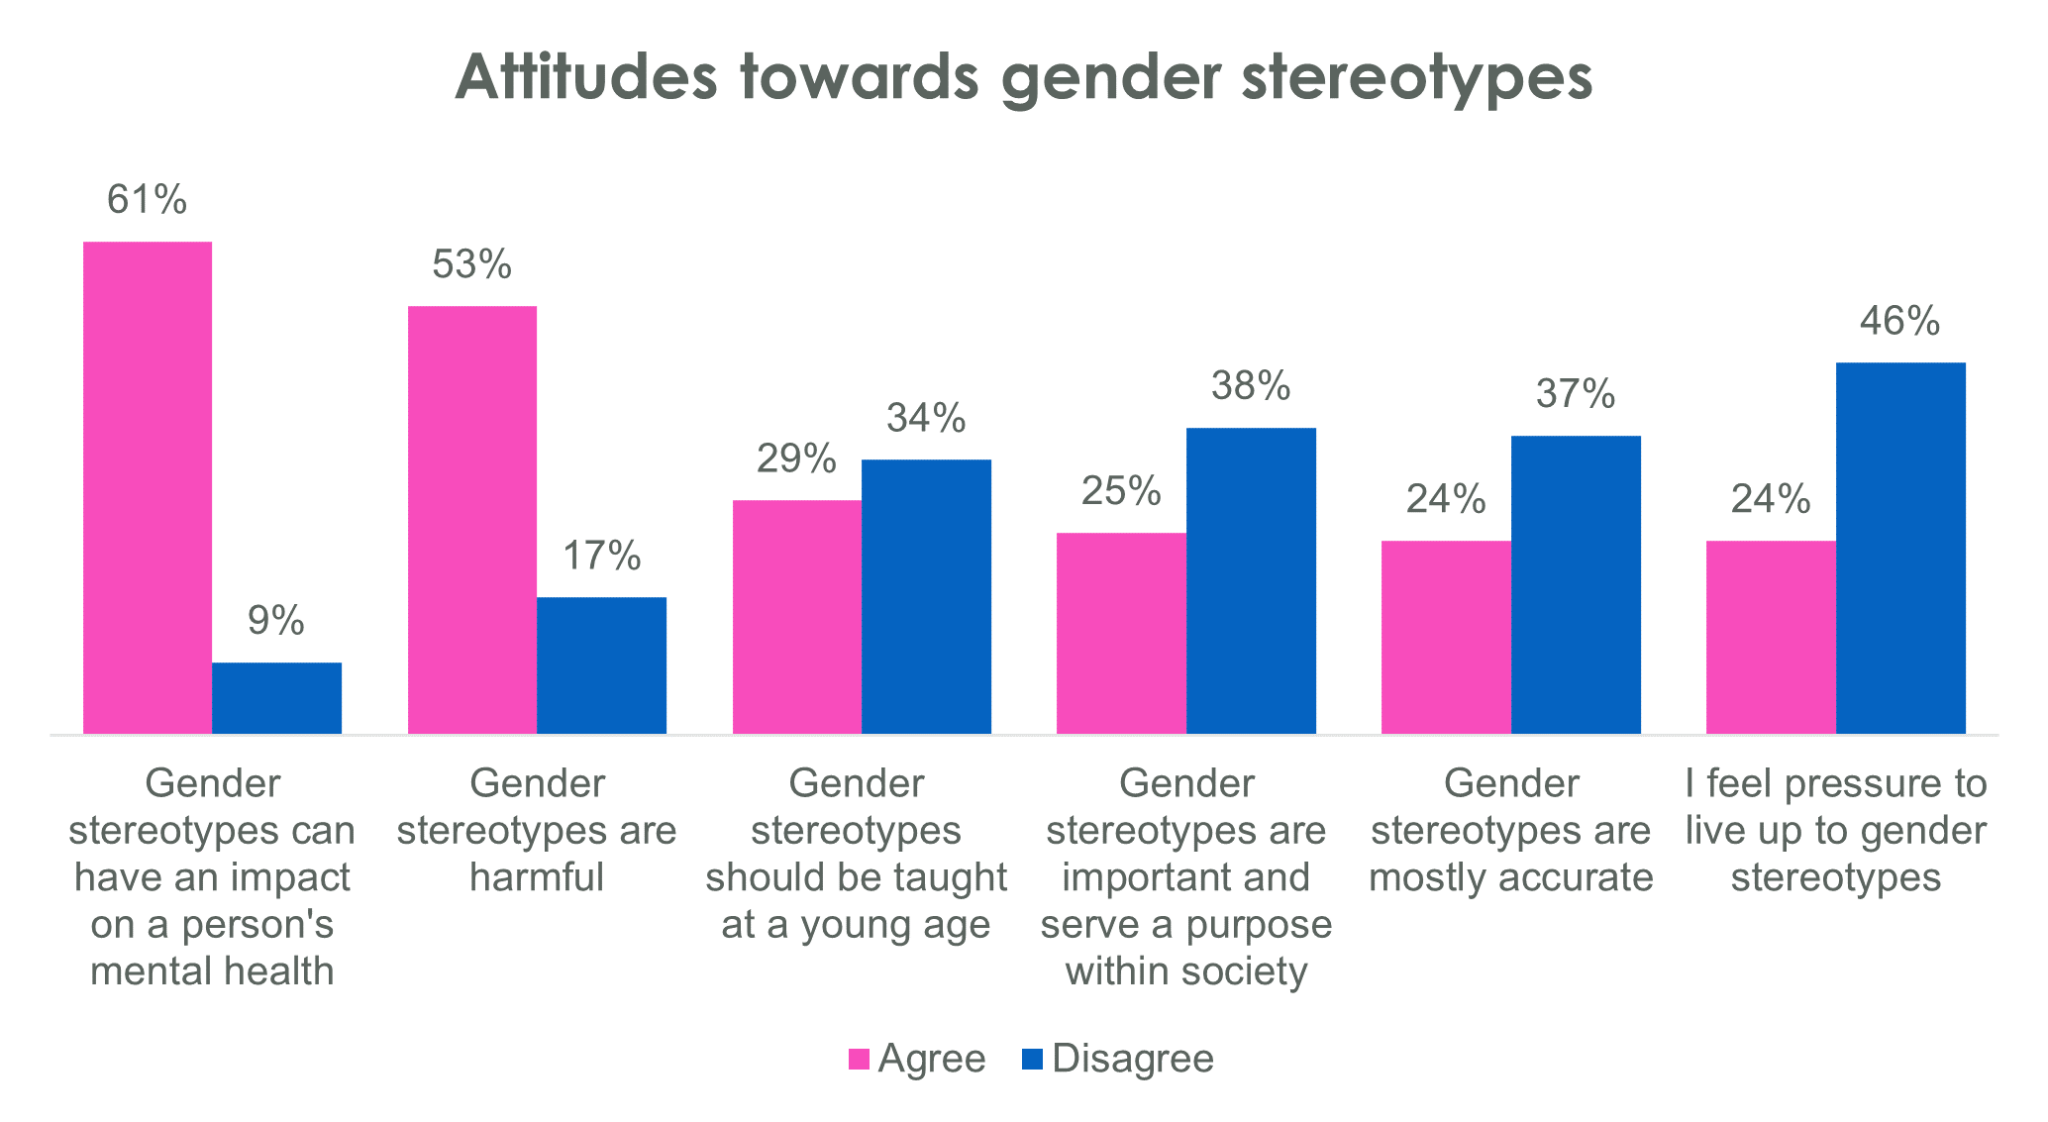 research on gender stereotypes of emotions shows that